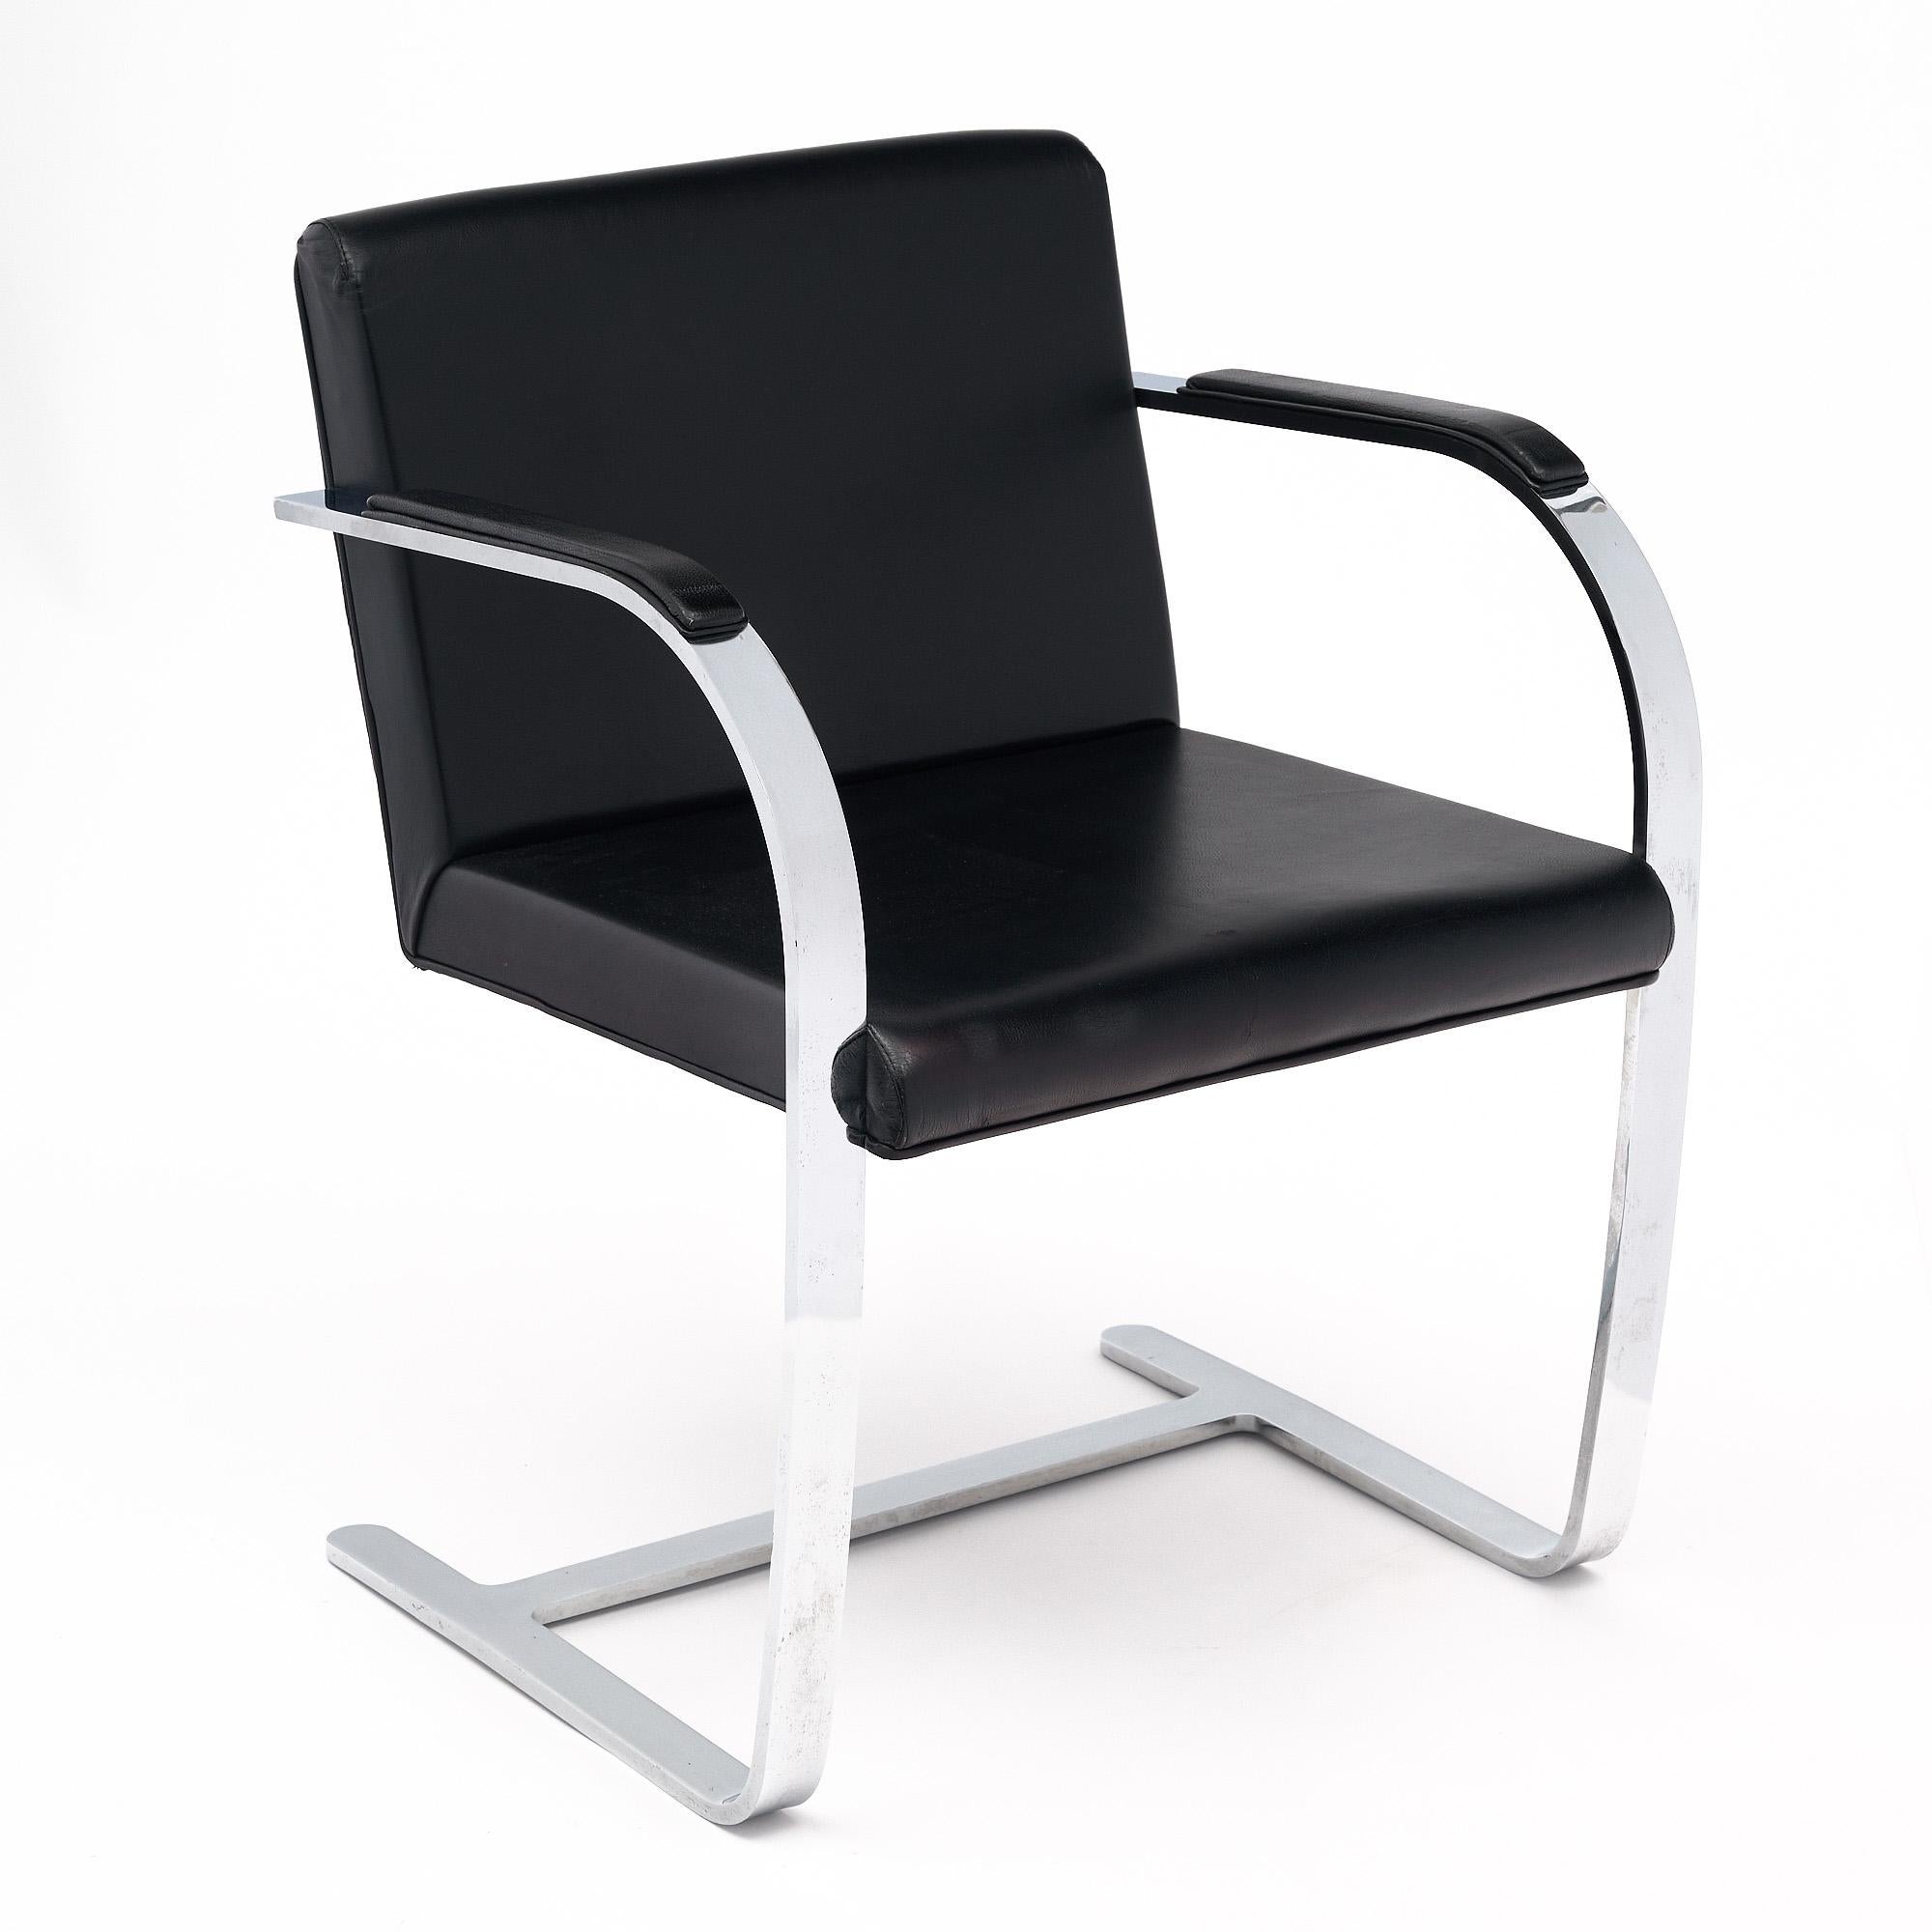 Set of four Brno chairs by Mies van der Rohe for Knoll. This set has the classic chrome structure with the original flat bar design. The upholstery is all black leather. These chairs were originally designed for his Tugendhat house in Brno, Czech